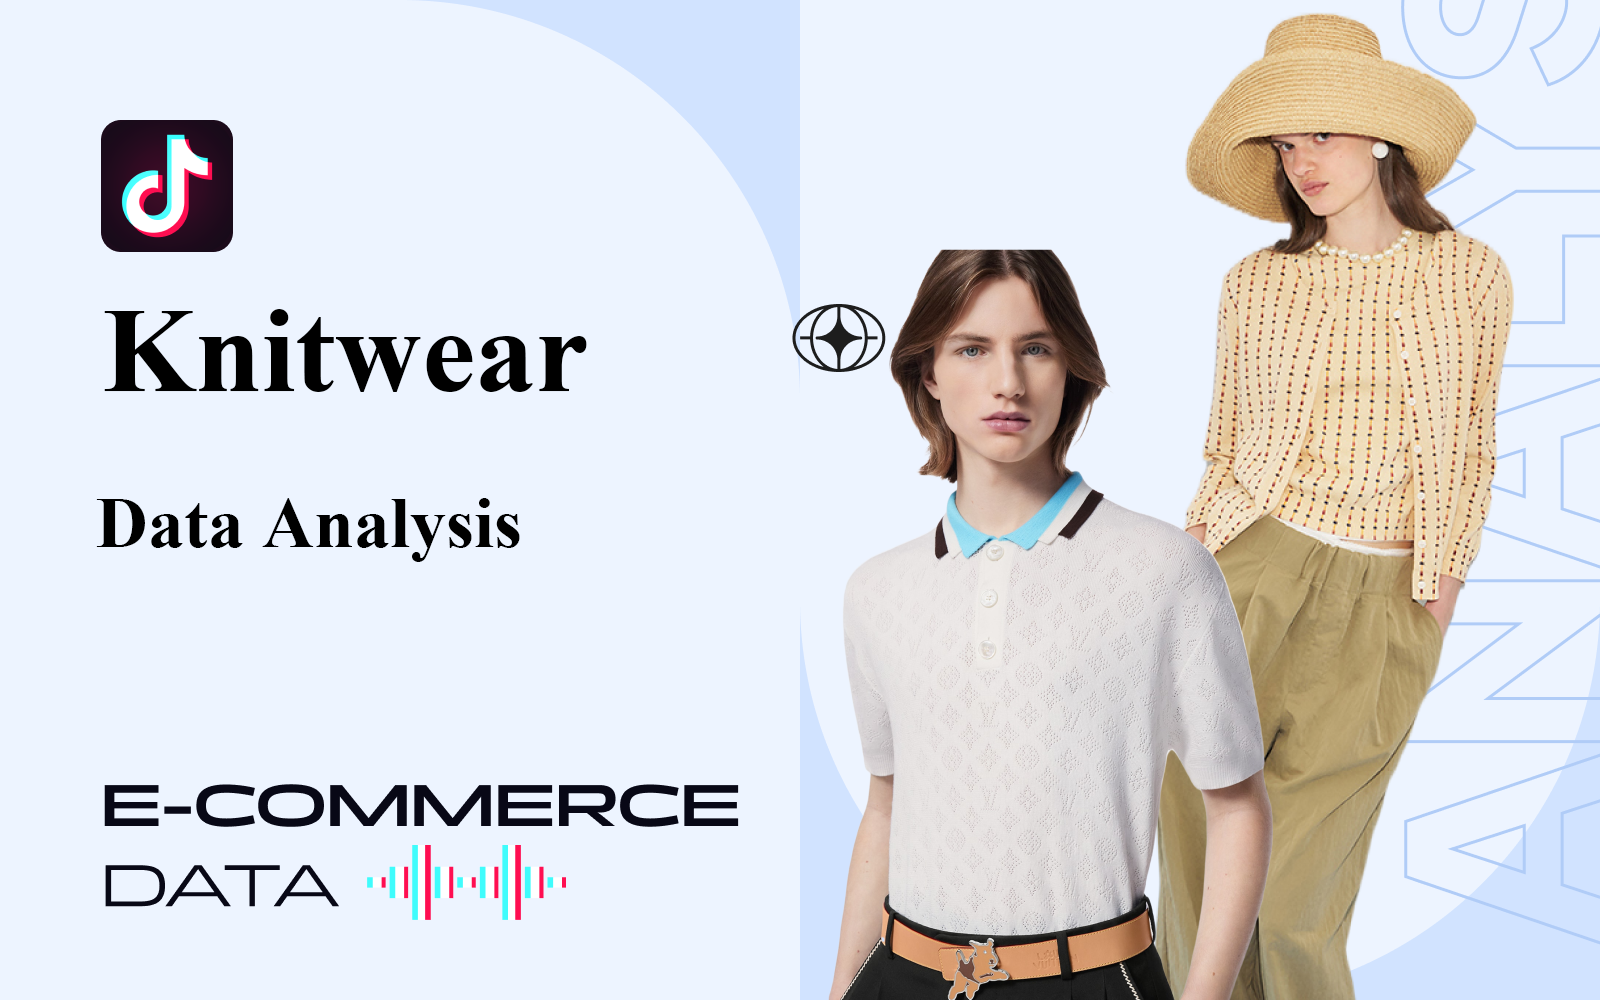 Knitwear -- The Data Analysis of Tiktok E-commerce Sales in April